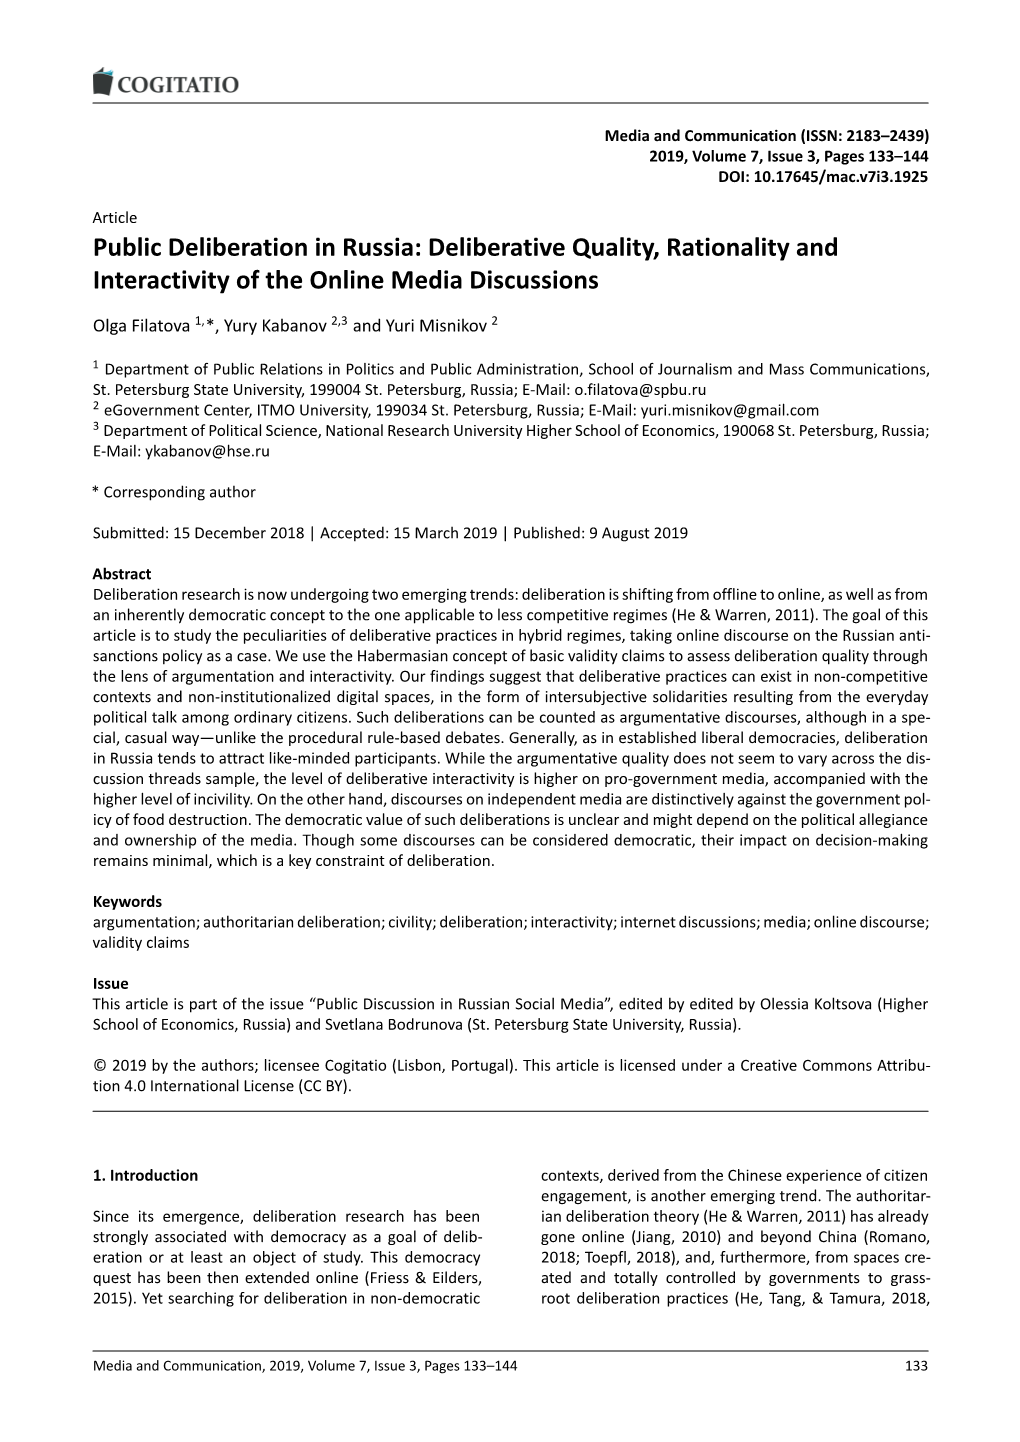 Public Deliberation in Russia: Deliberative Quality, Rationality and Interactivity of the Online Media Discussions